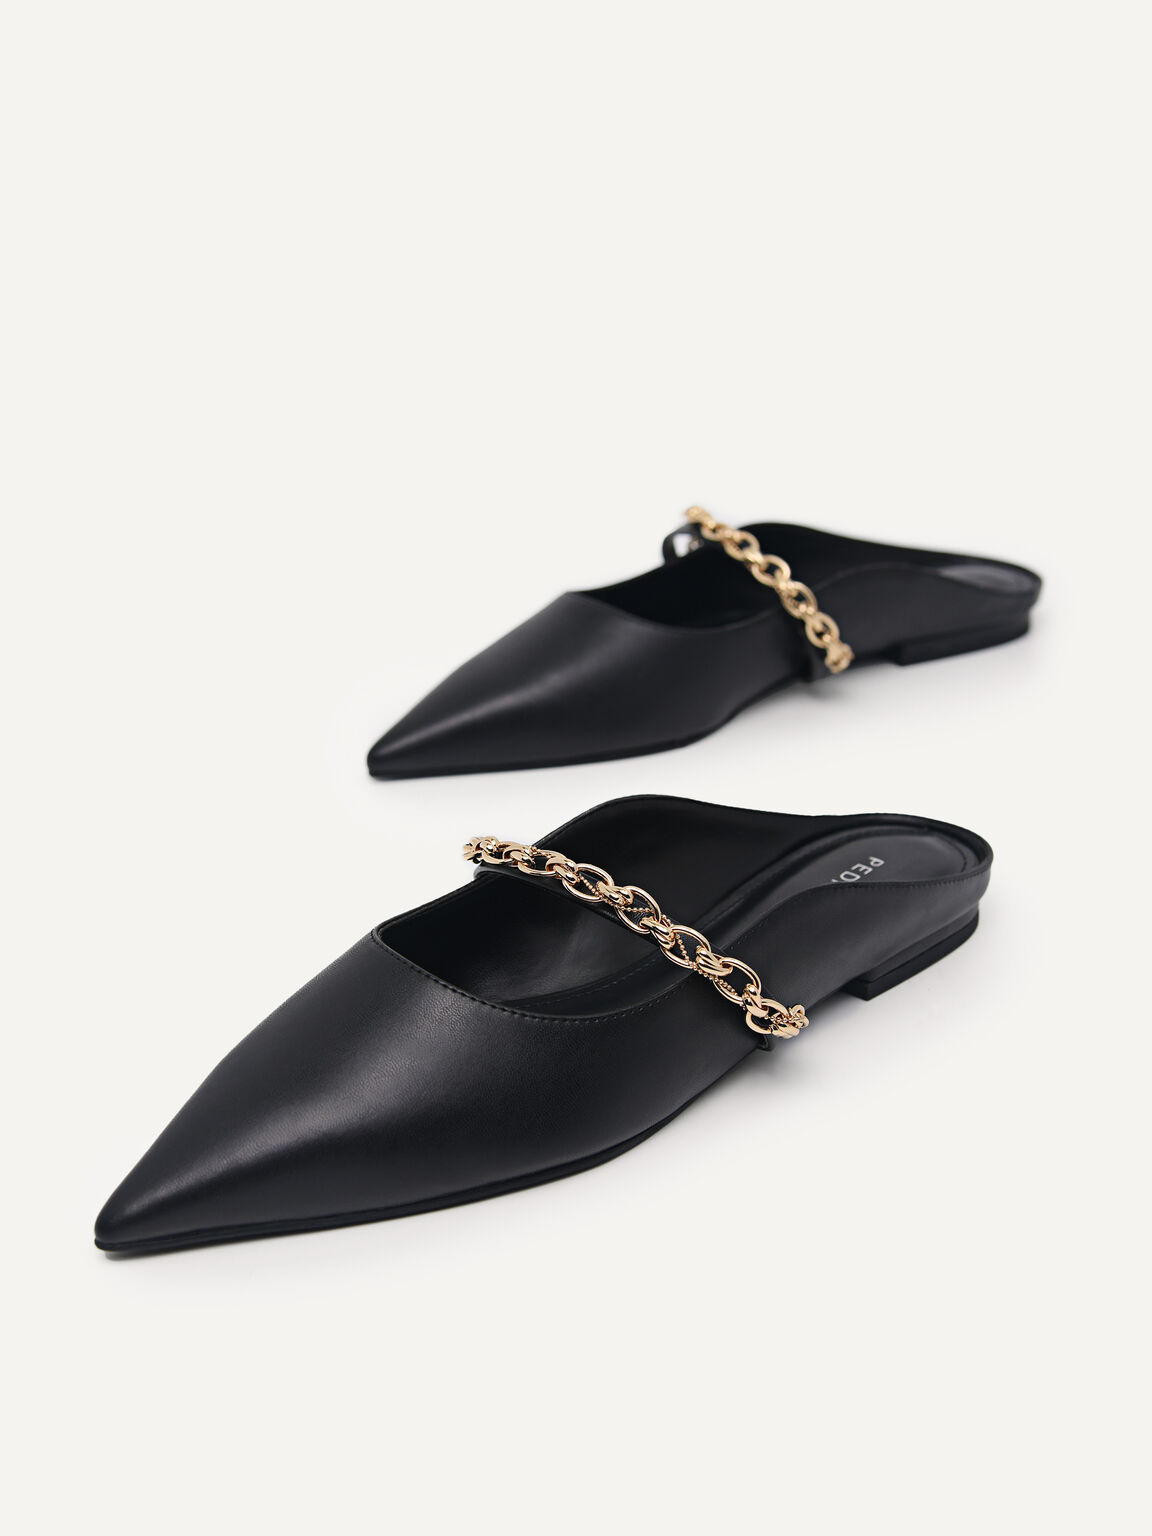 Mules with Chain Strap, Black